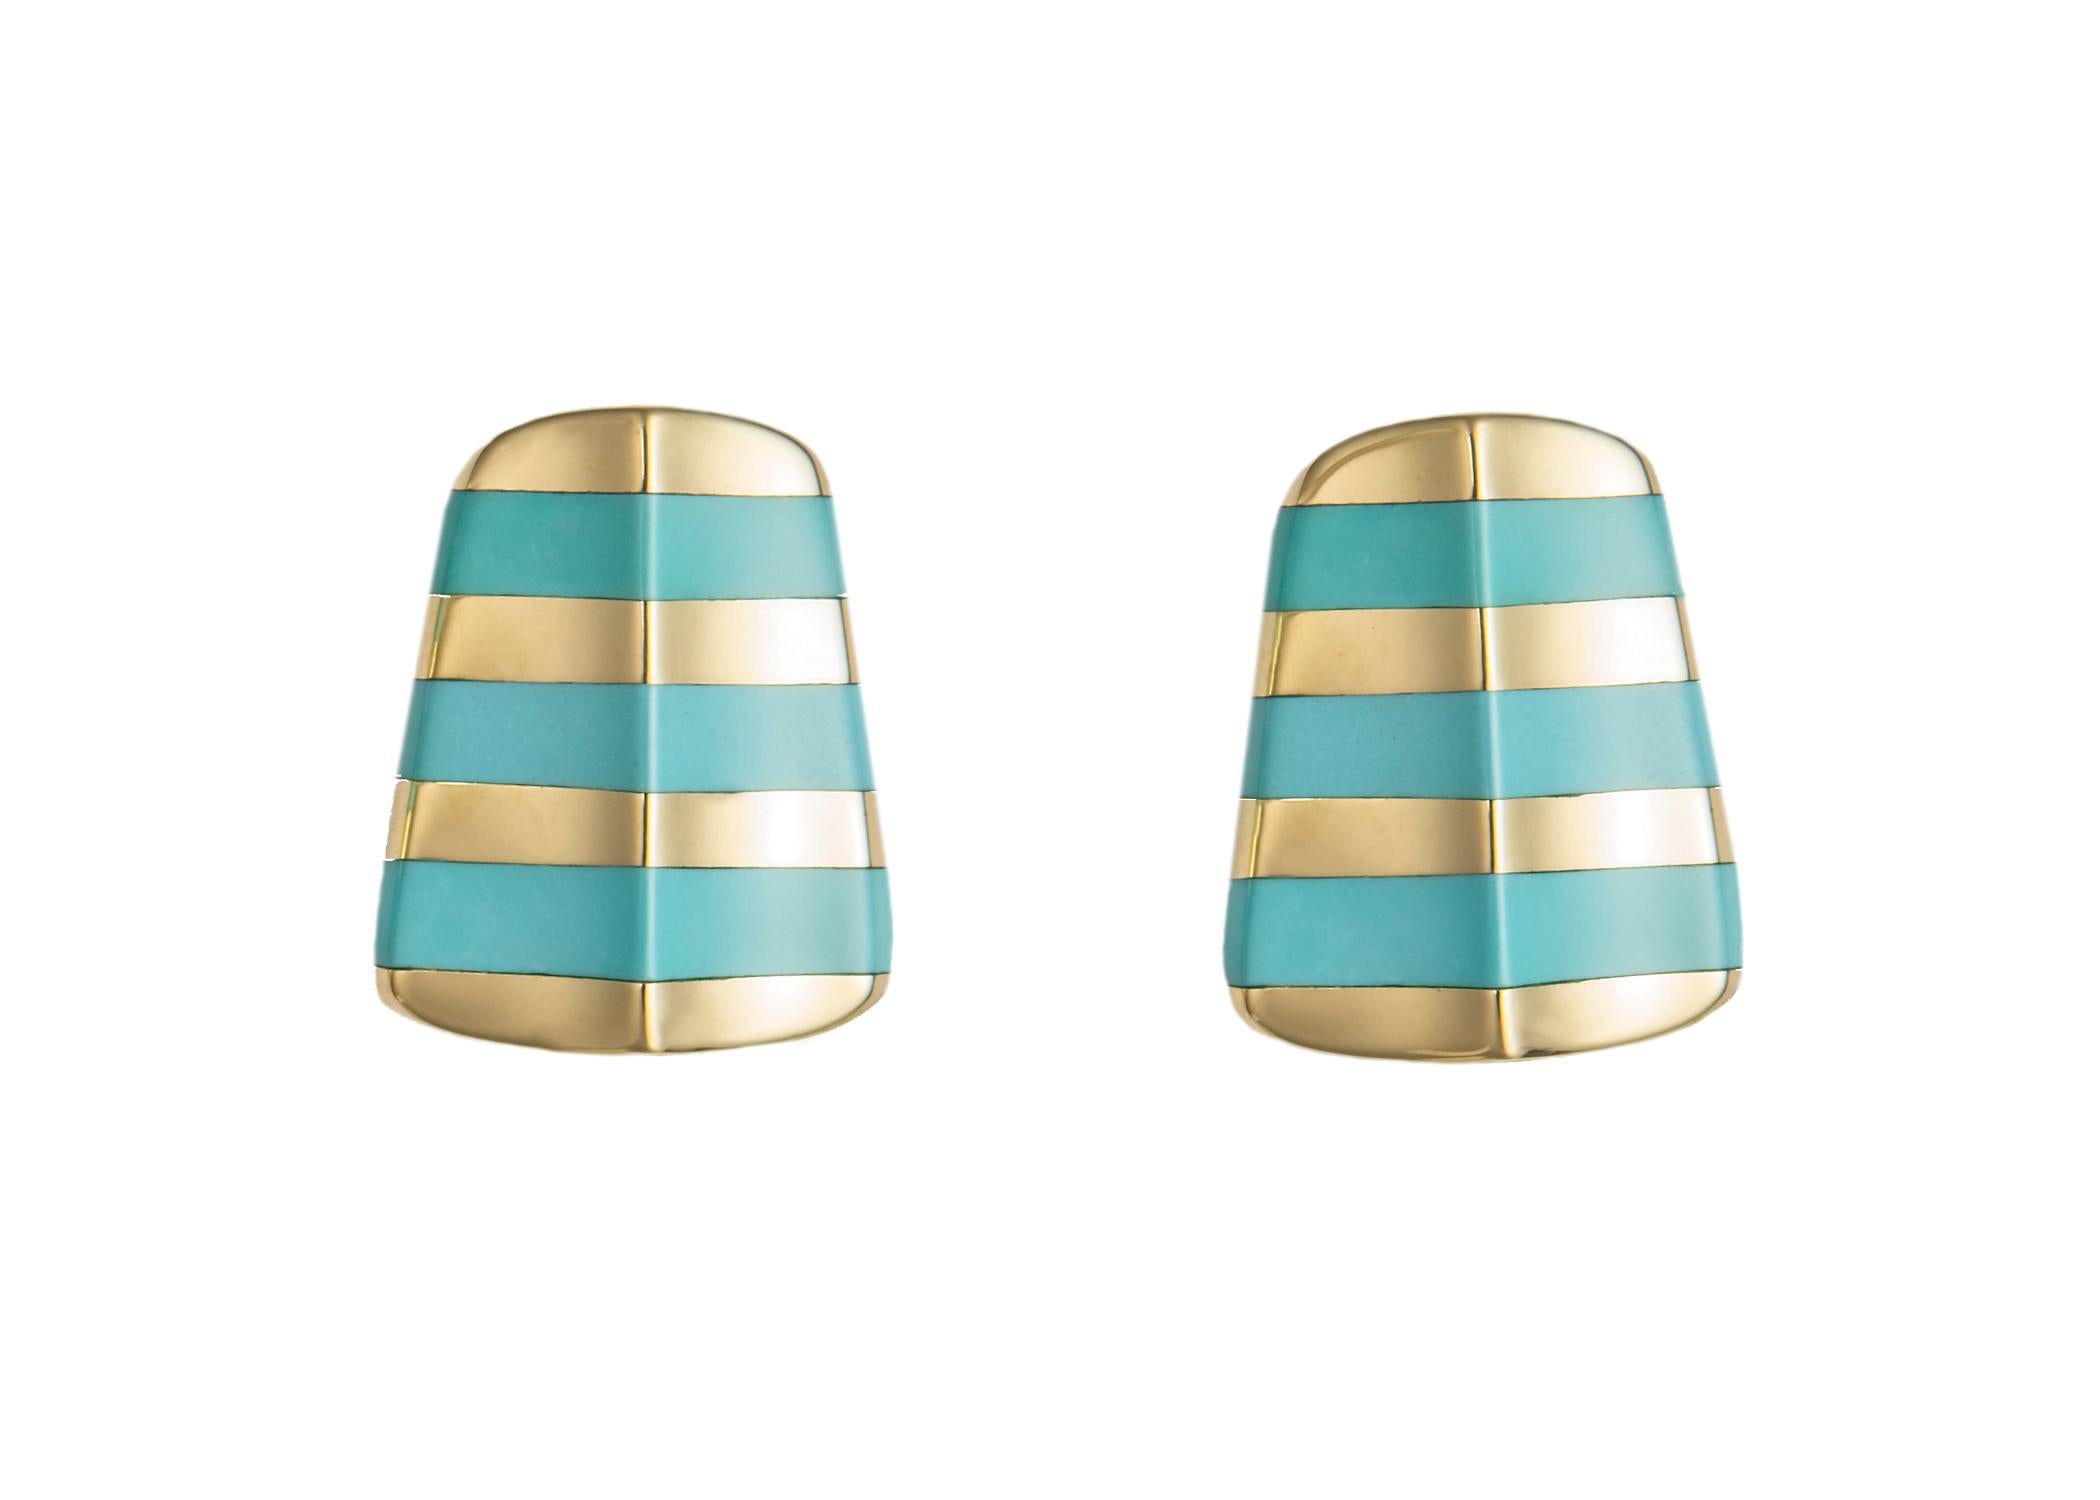 Angela Cummings began her career at Tiffany & Co. before starting her own highly successful company. Her unique designs are iconic and collectable. This banded turquoise and gold design is rare and highly prized. 